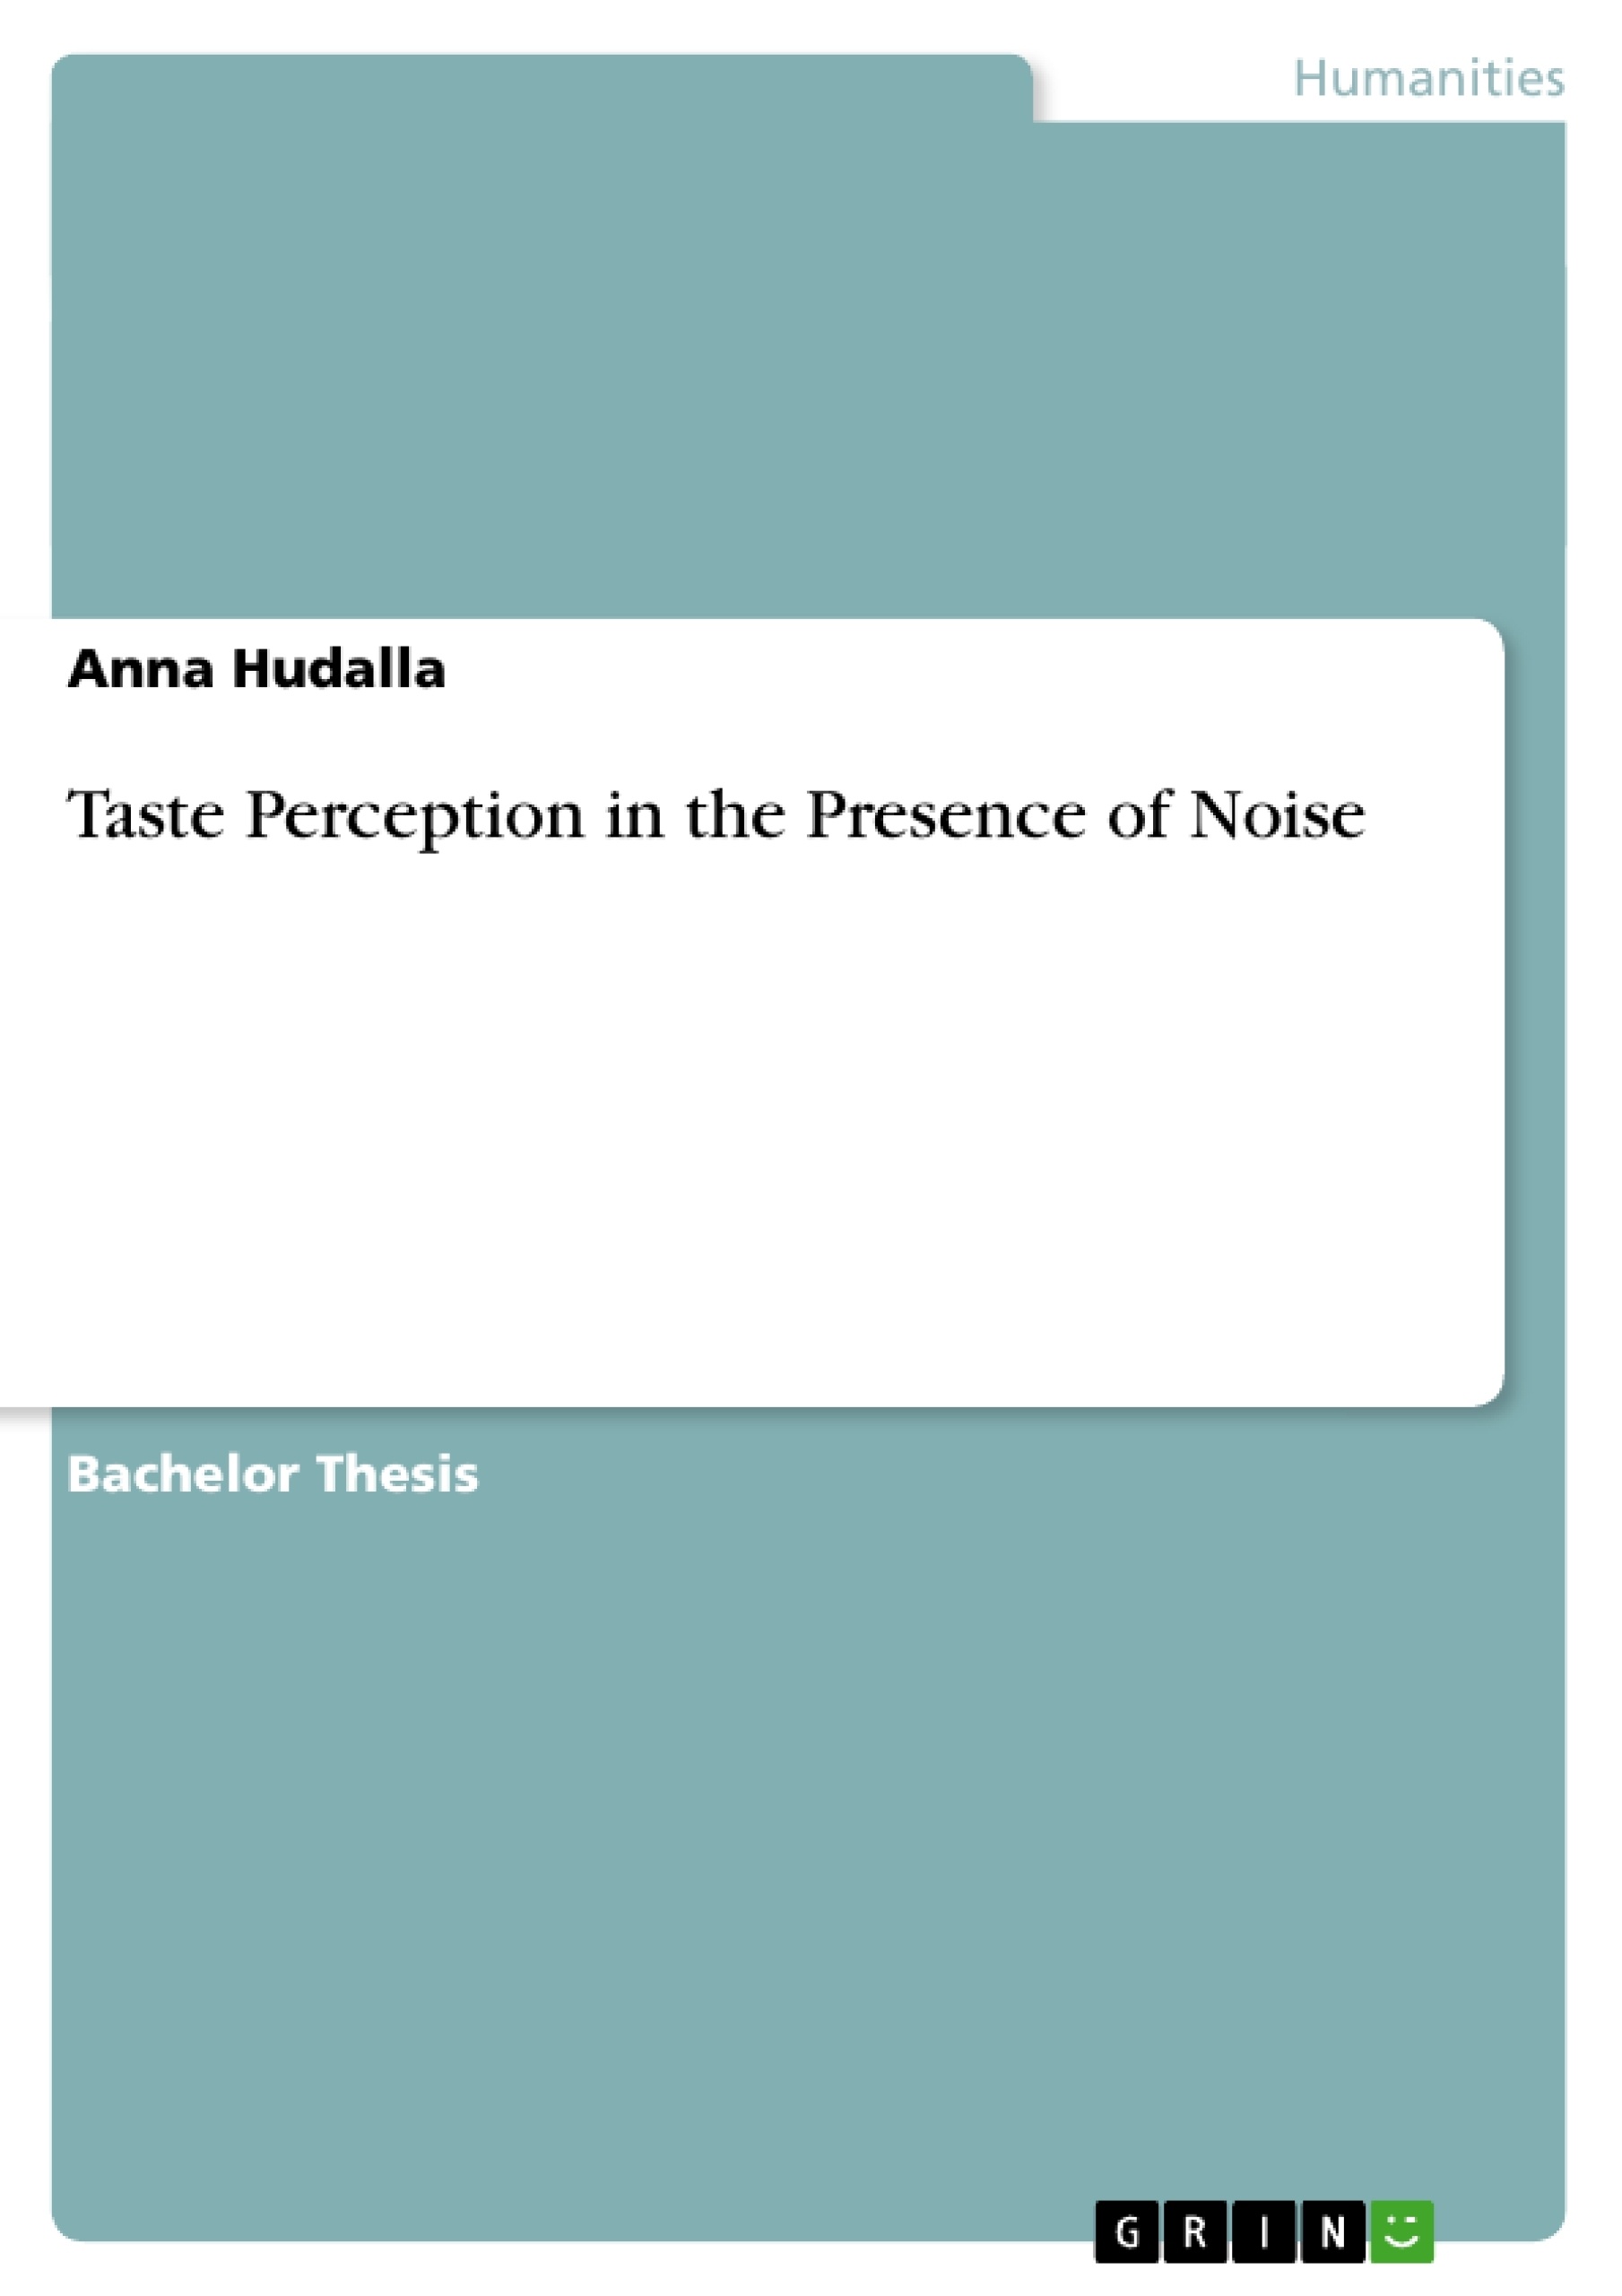 Title: Taste Perception in the Presence of Noise